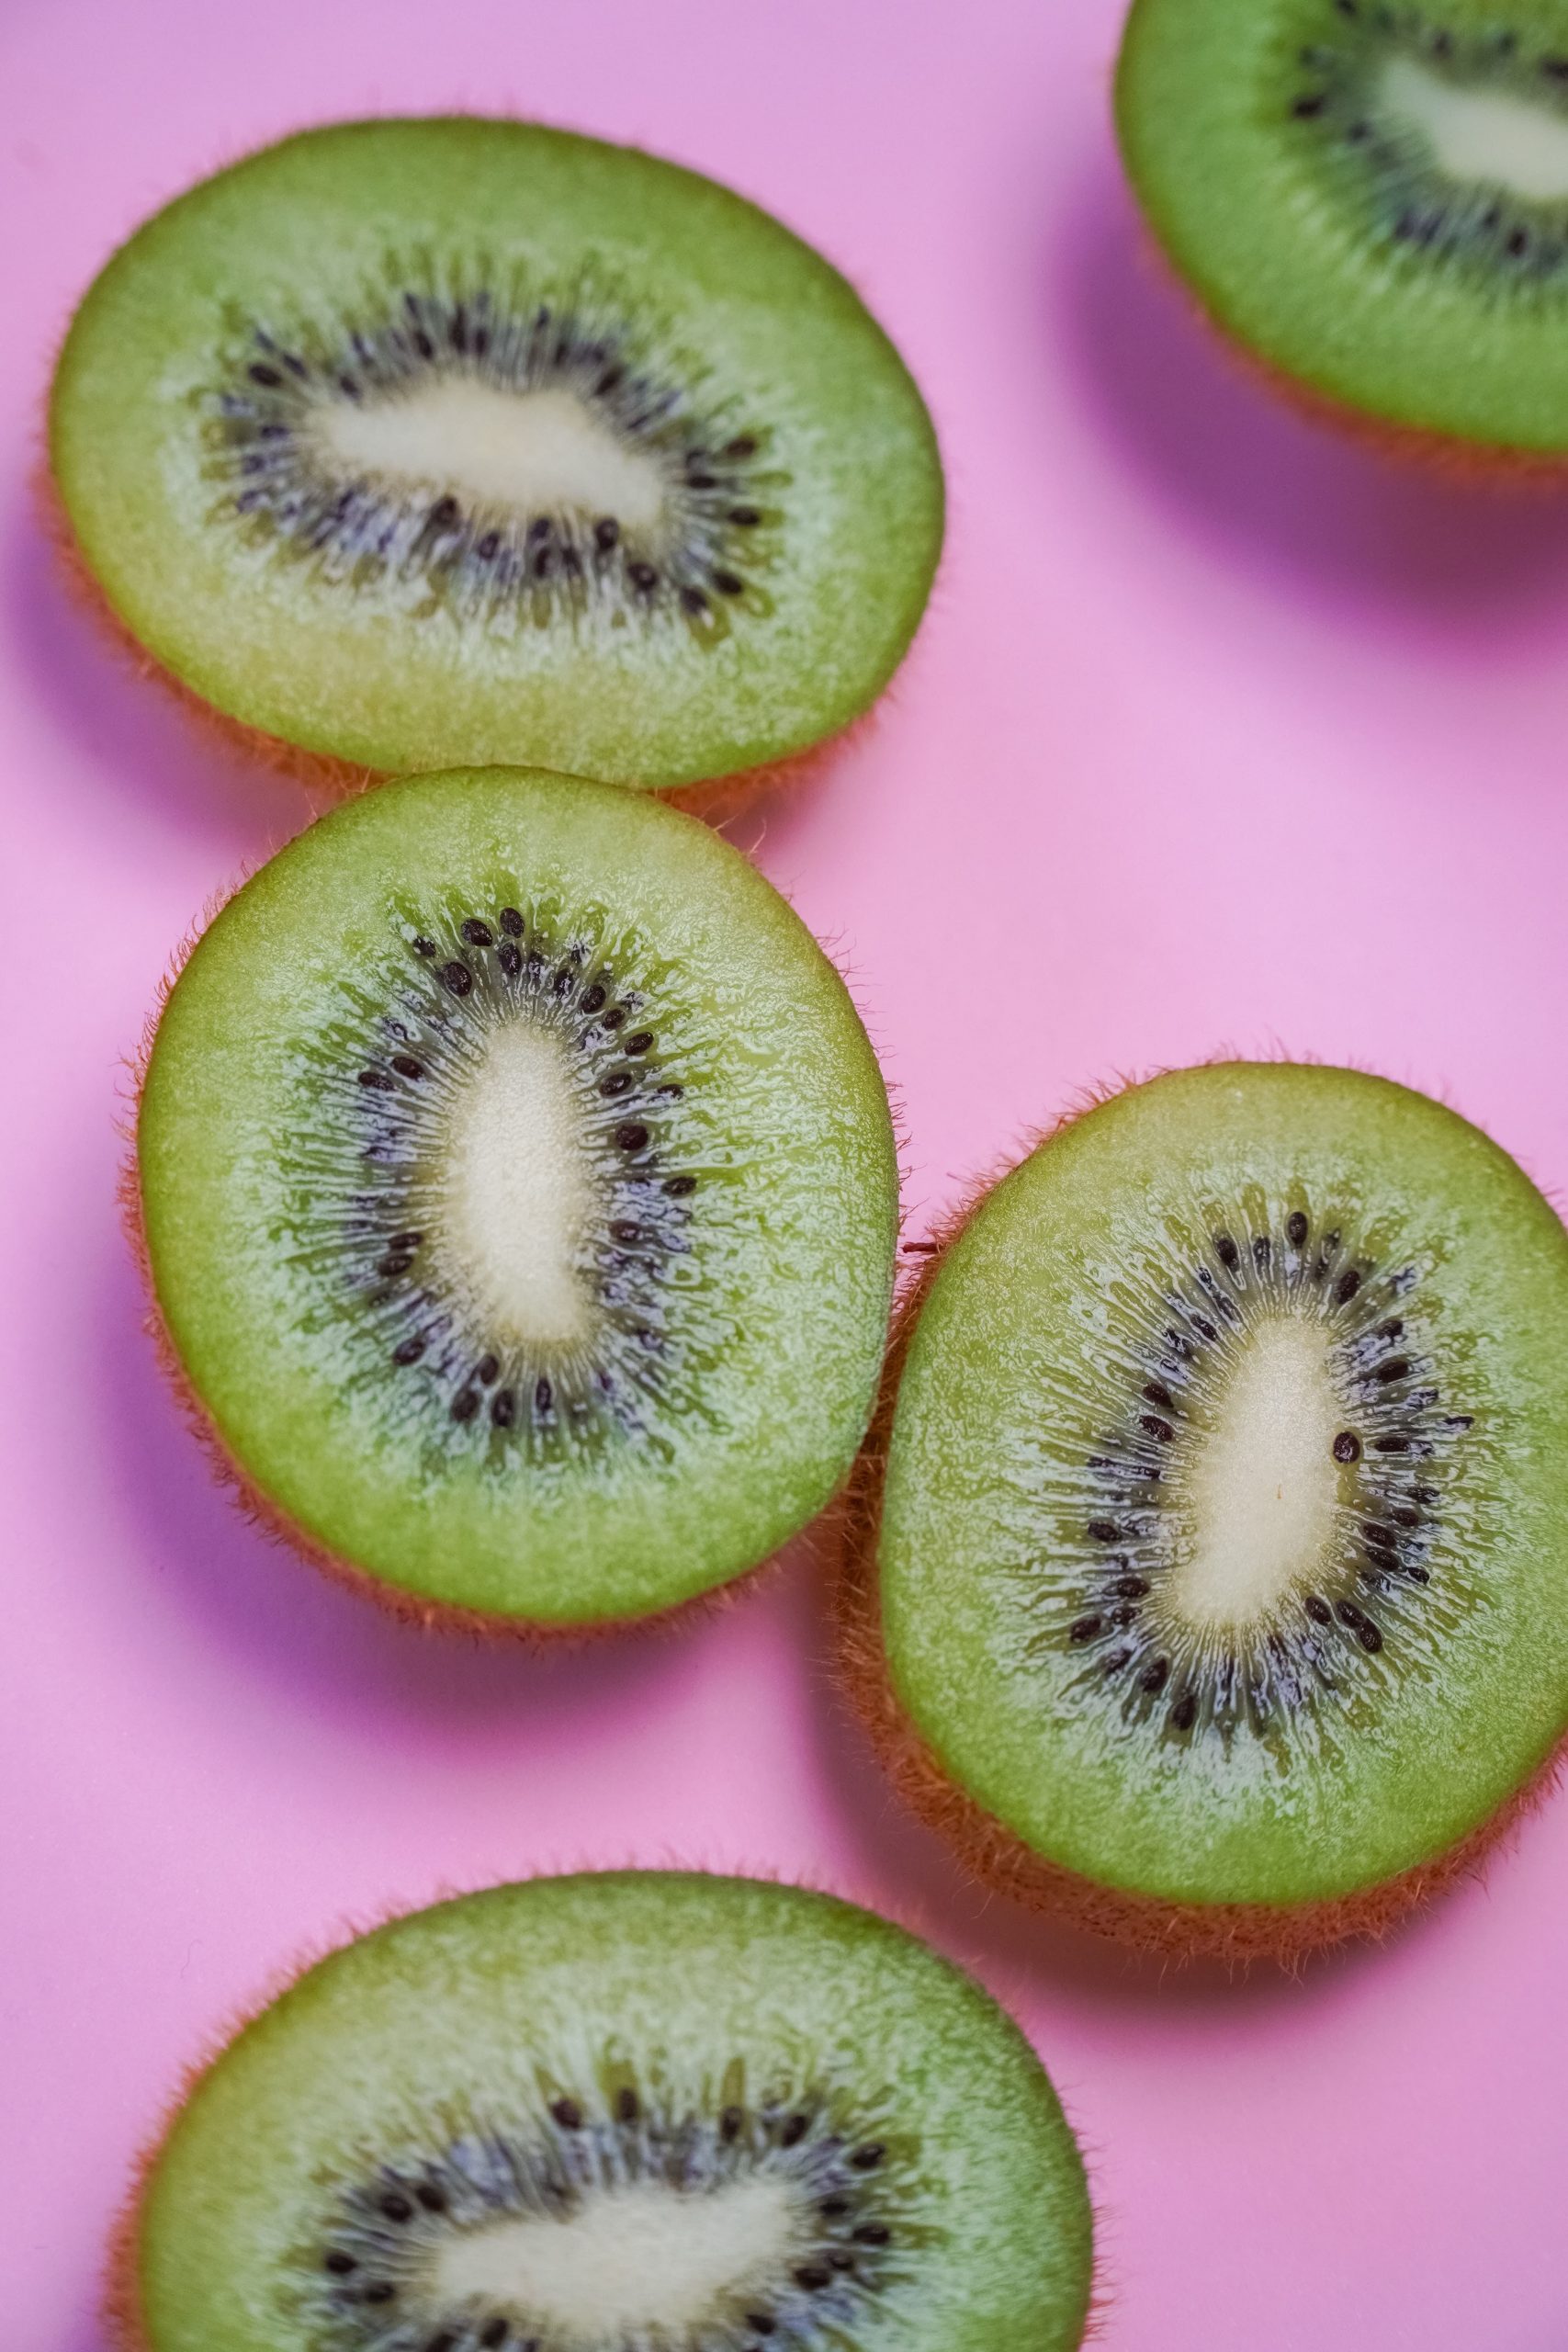 Why IBS researchers are talking about kiwifruit - FoodMarble